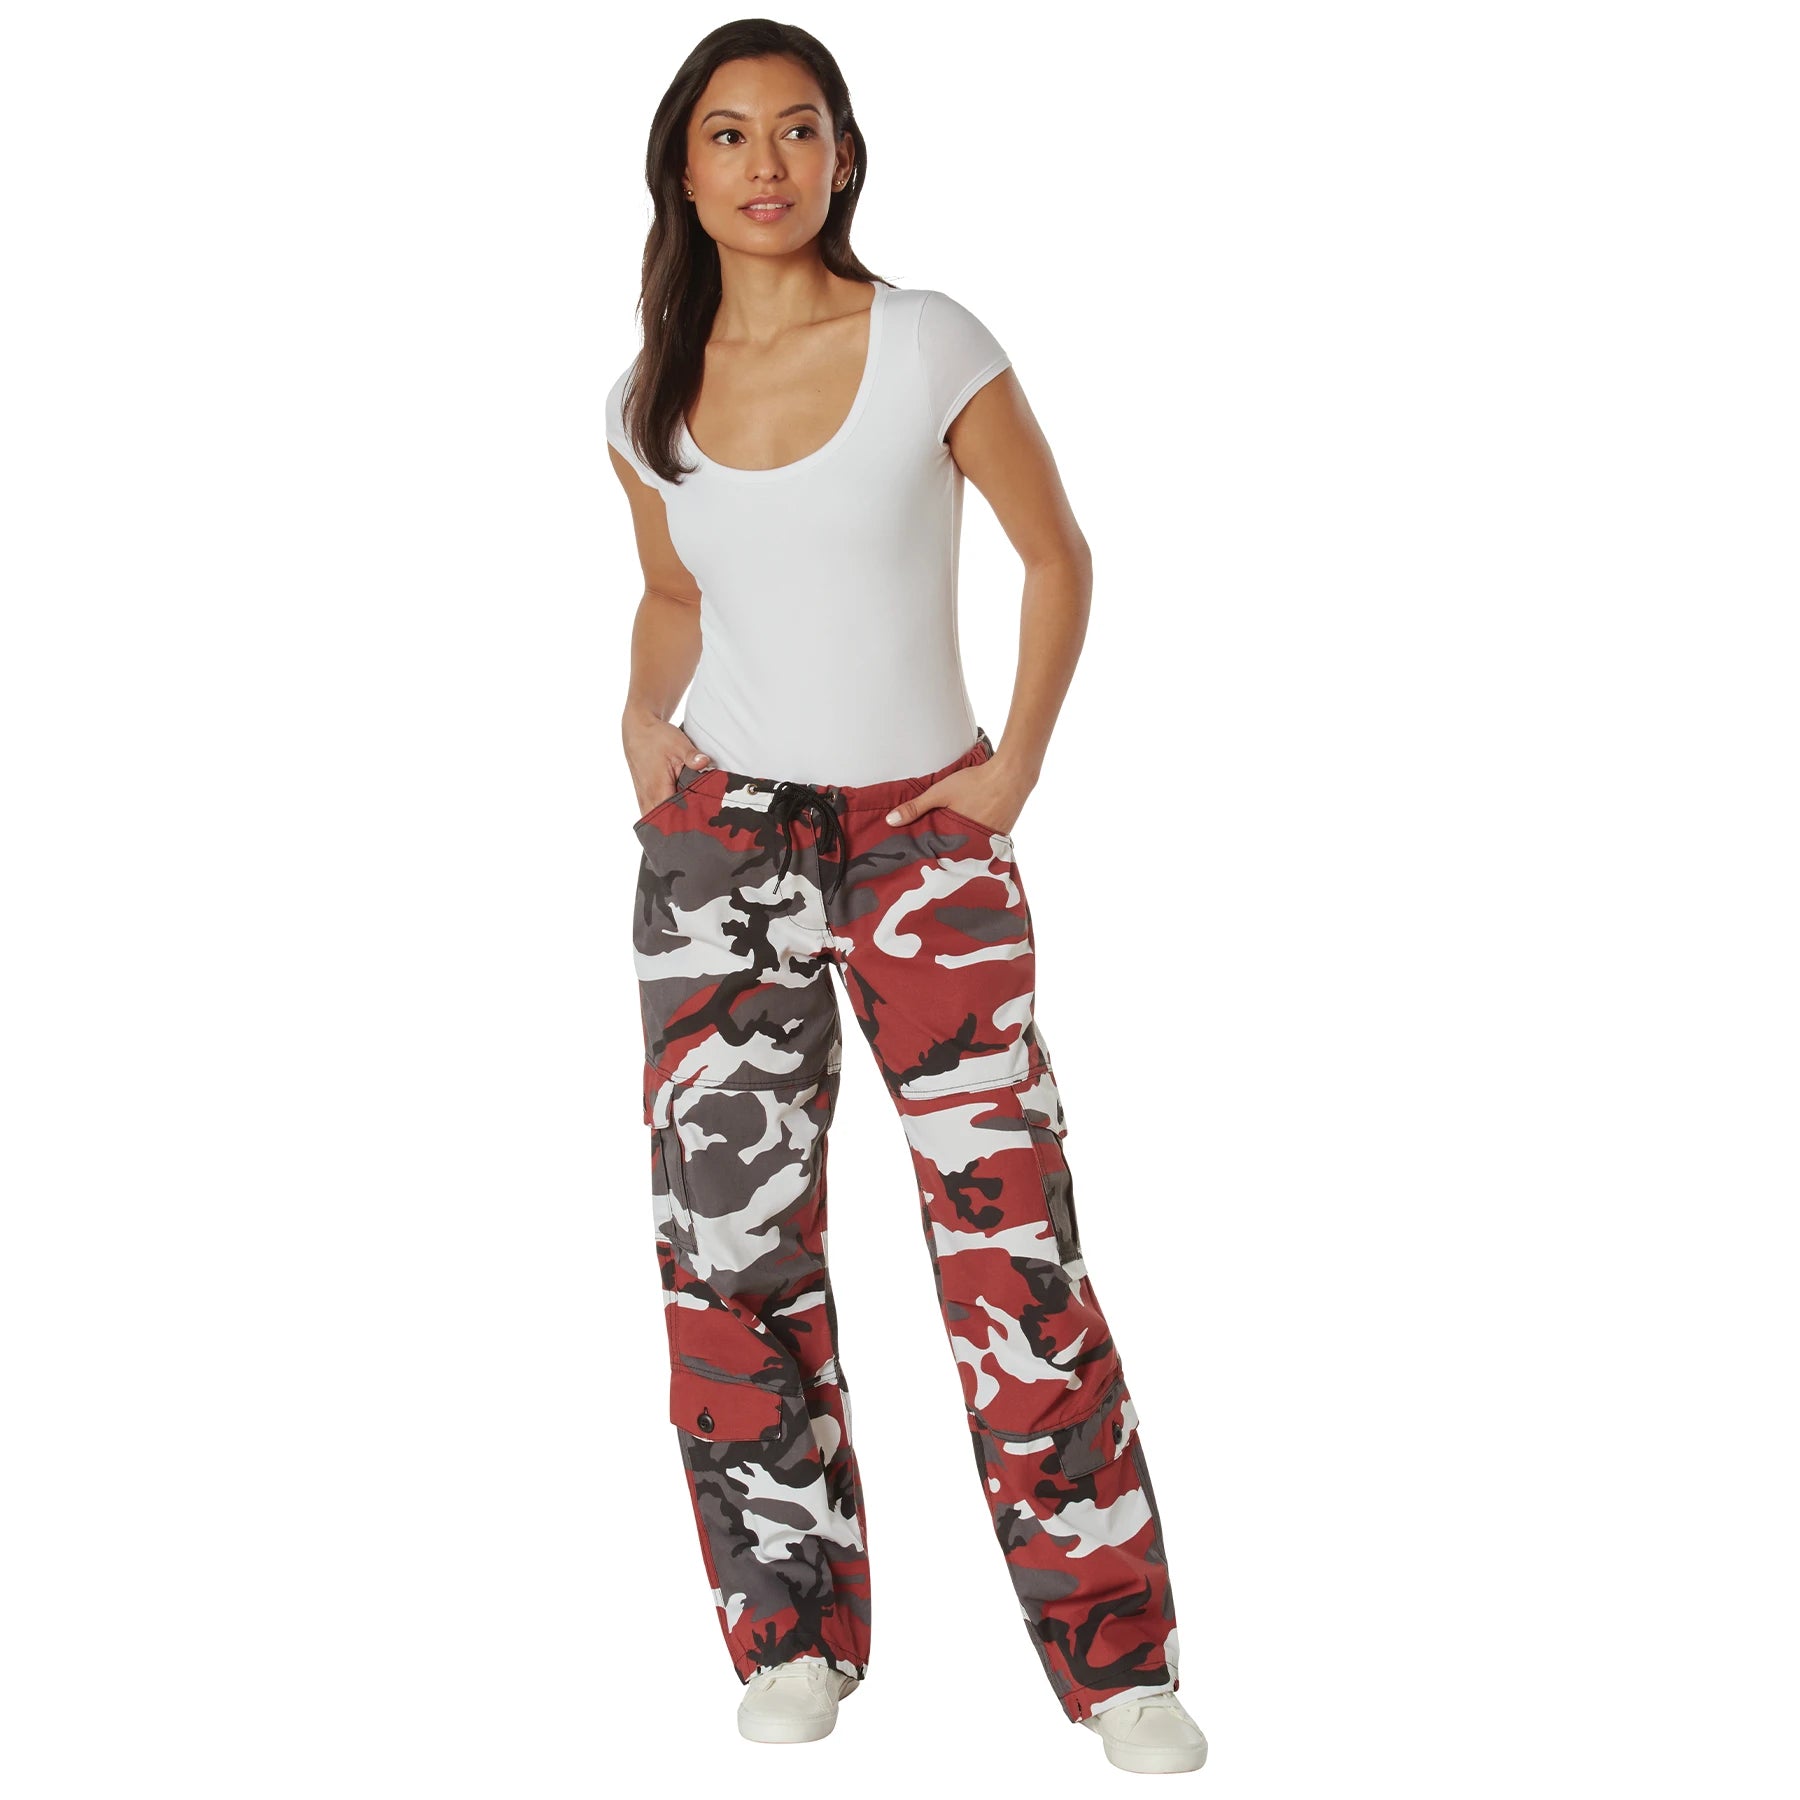 Pants Rothco Camo Red - Army Supply Store Military